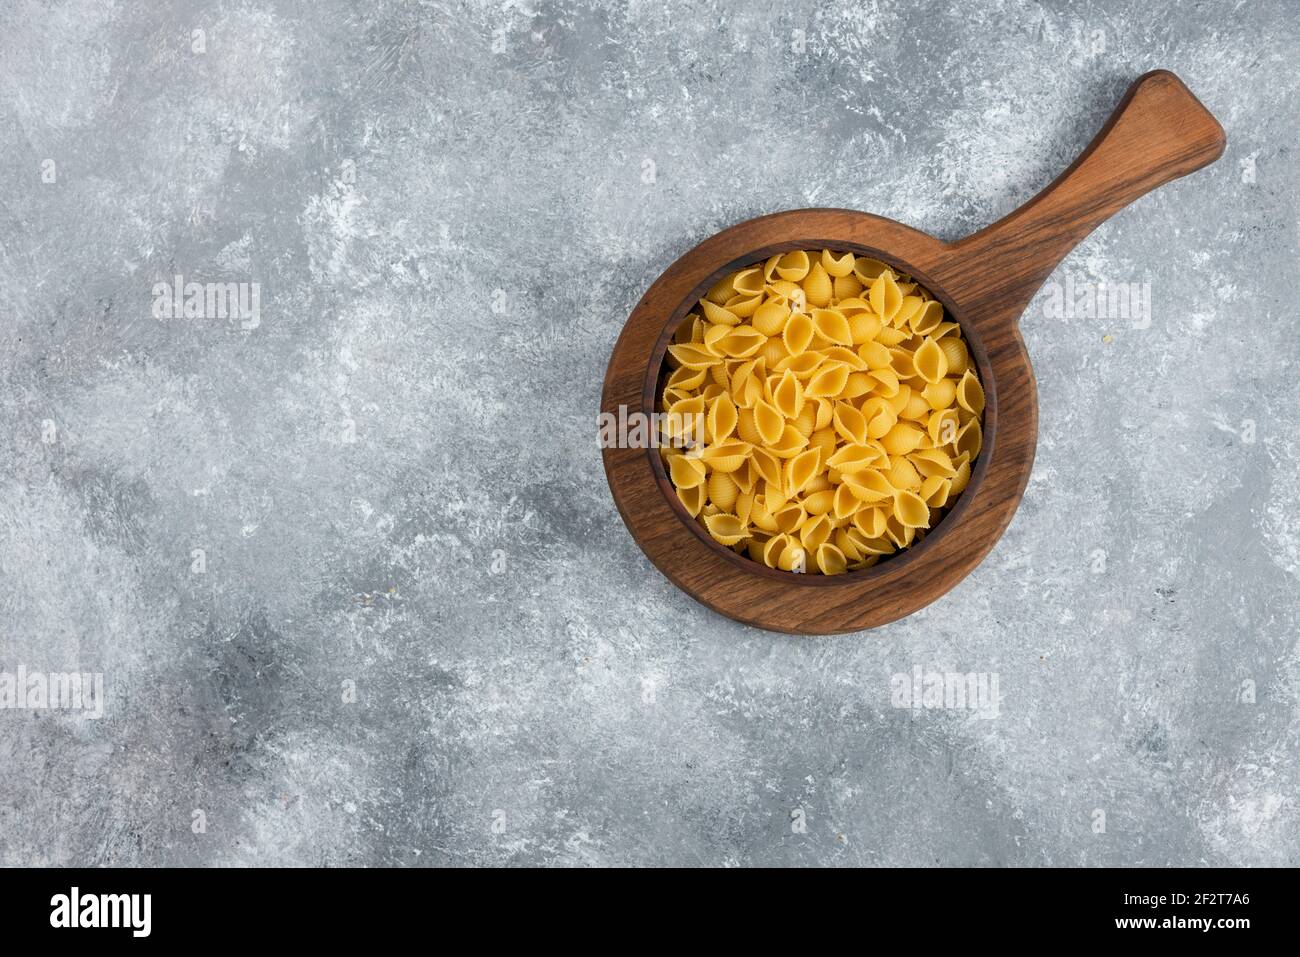 Wooden bowl of raw seashell pasta on cutting board Stock Photo